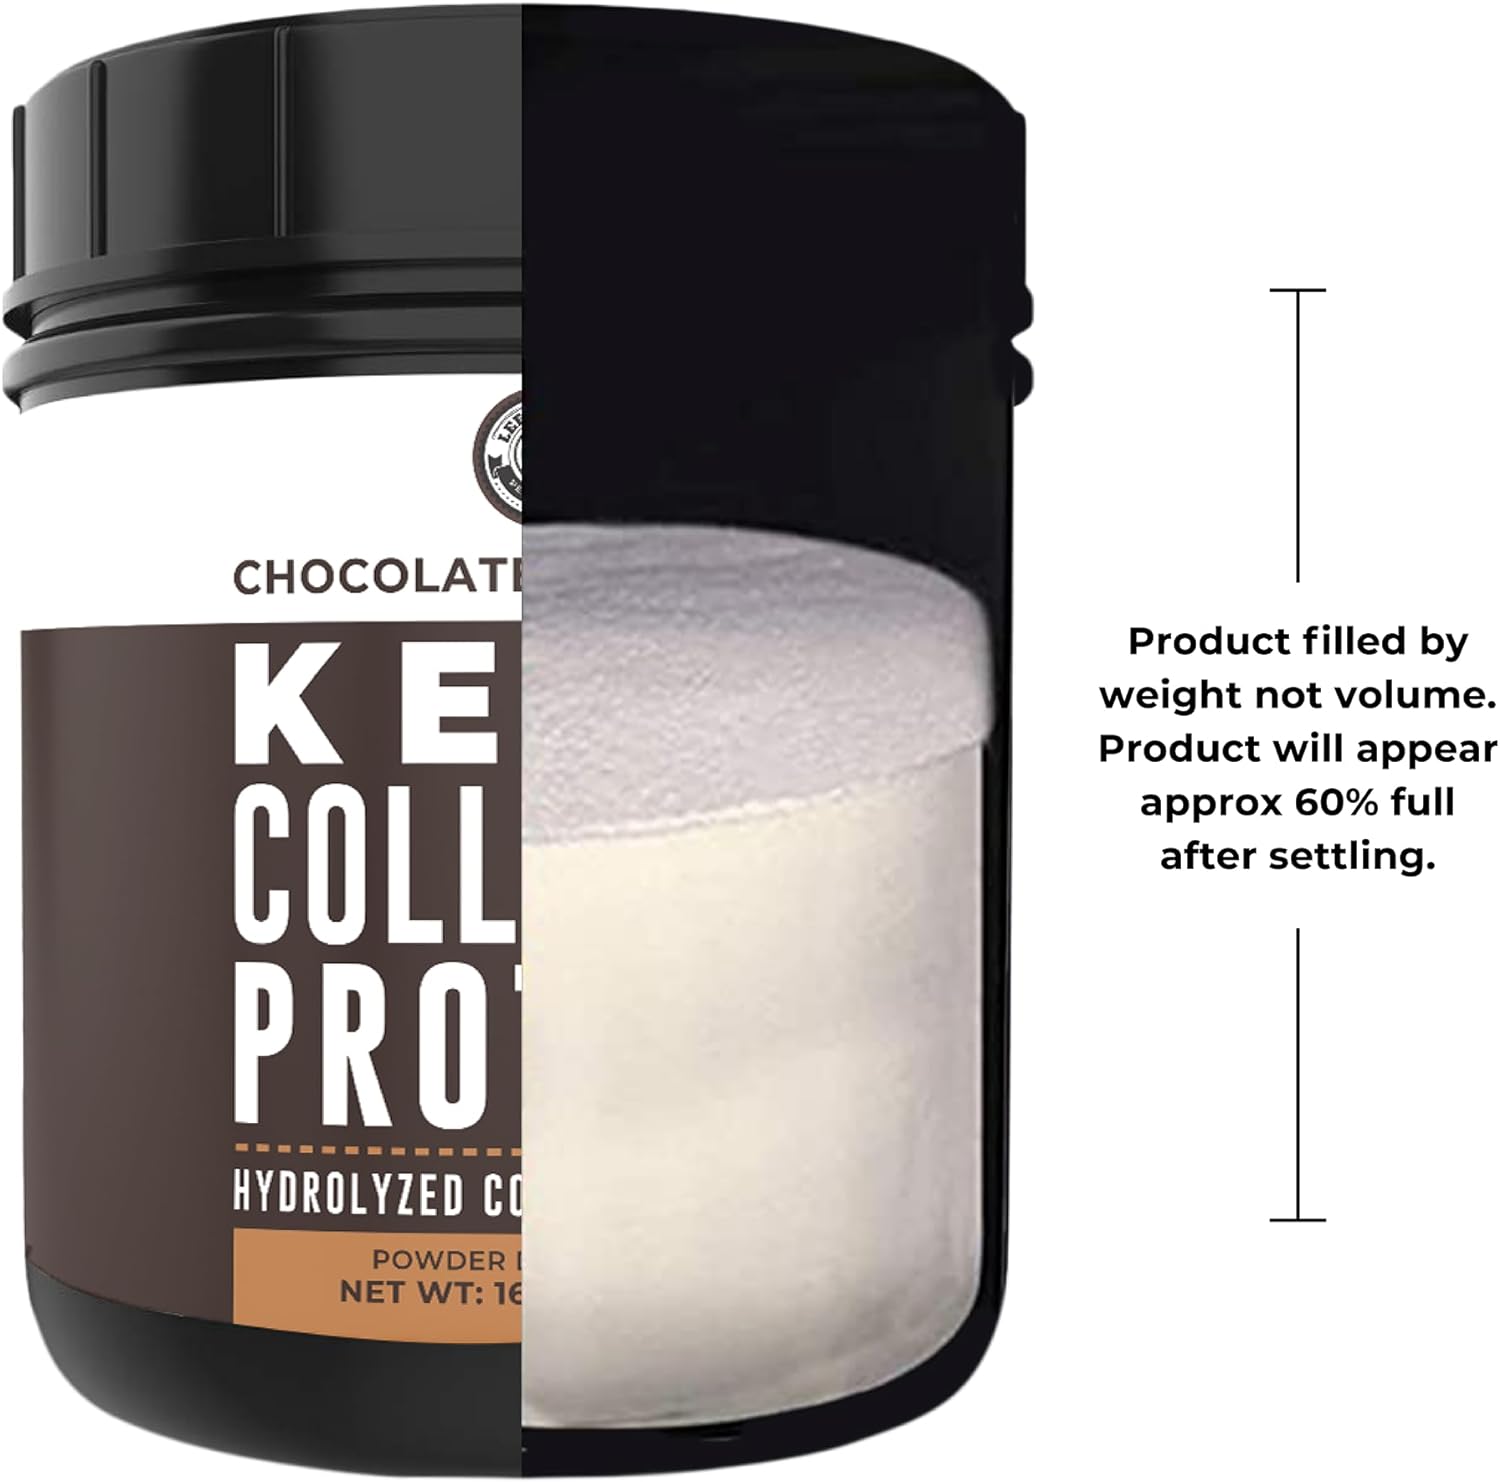 Left Coast Performance Keto Collagen Protein Powder Chocolate, 10g Grass-Fed Collagen, 5g MCT Powder, 1lb, 25 Servings, No Carb Protein Powder, Low Carb Meal Replacement Shakes, Ketogenic Shake Mix : Health & Household